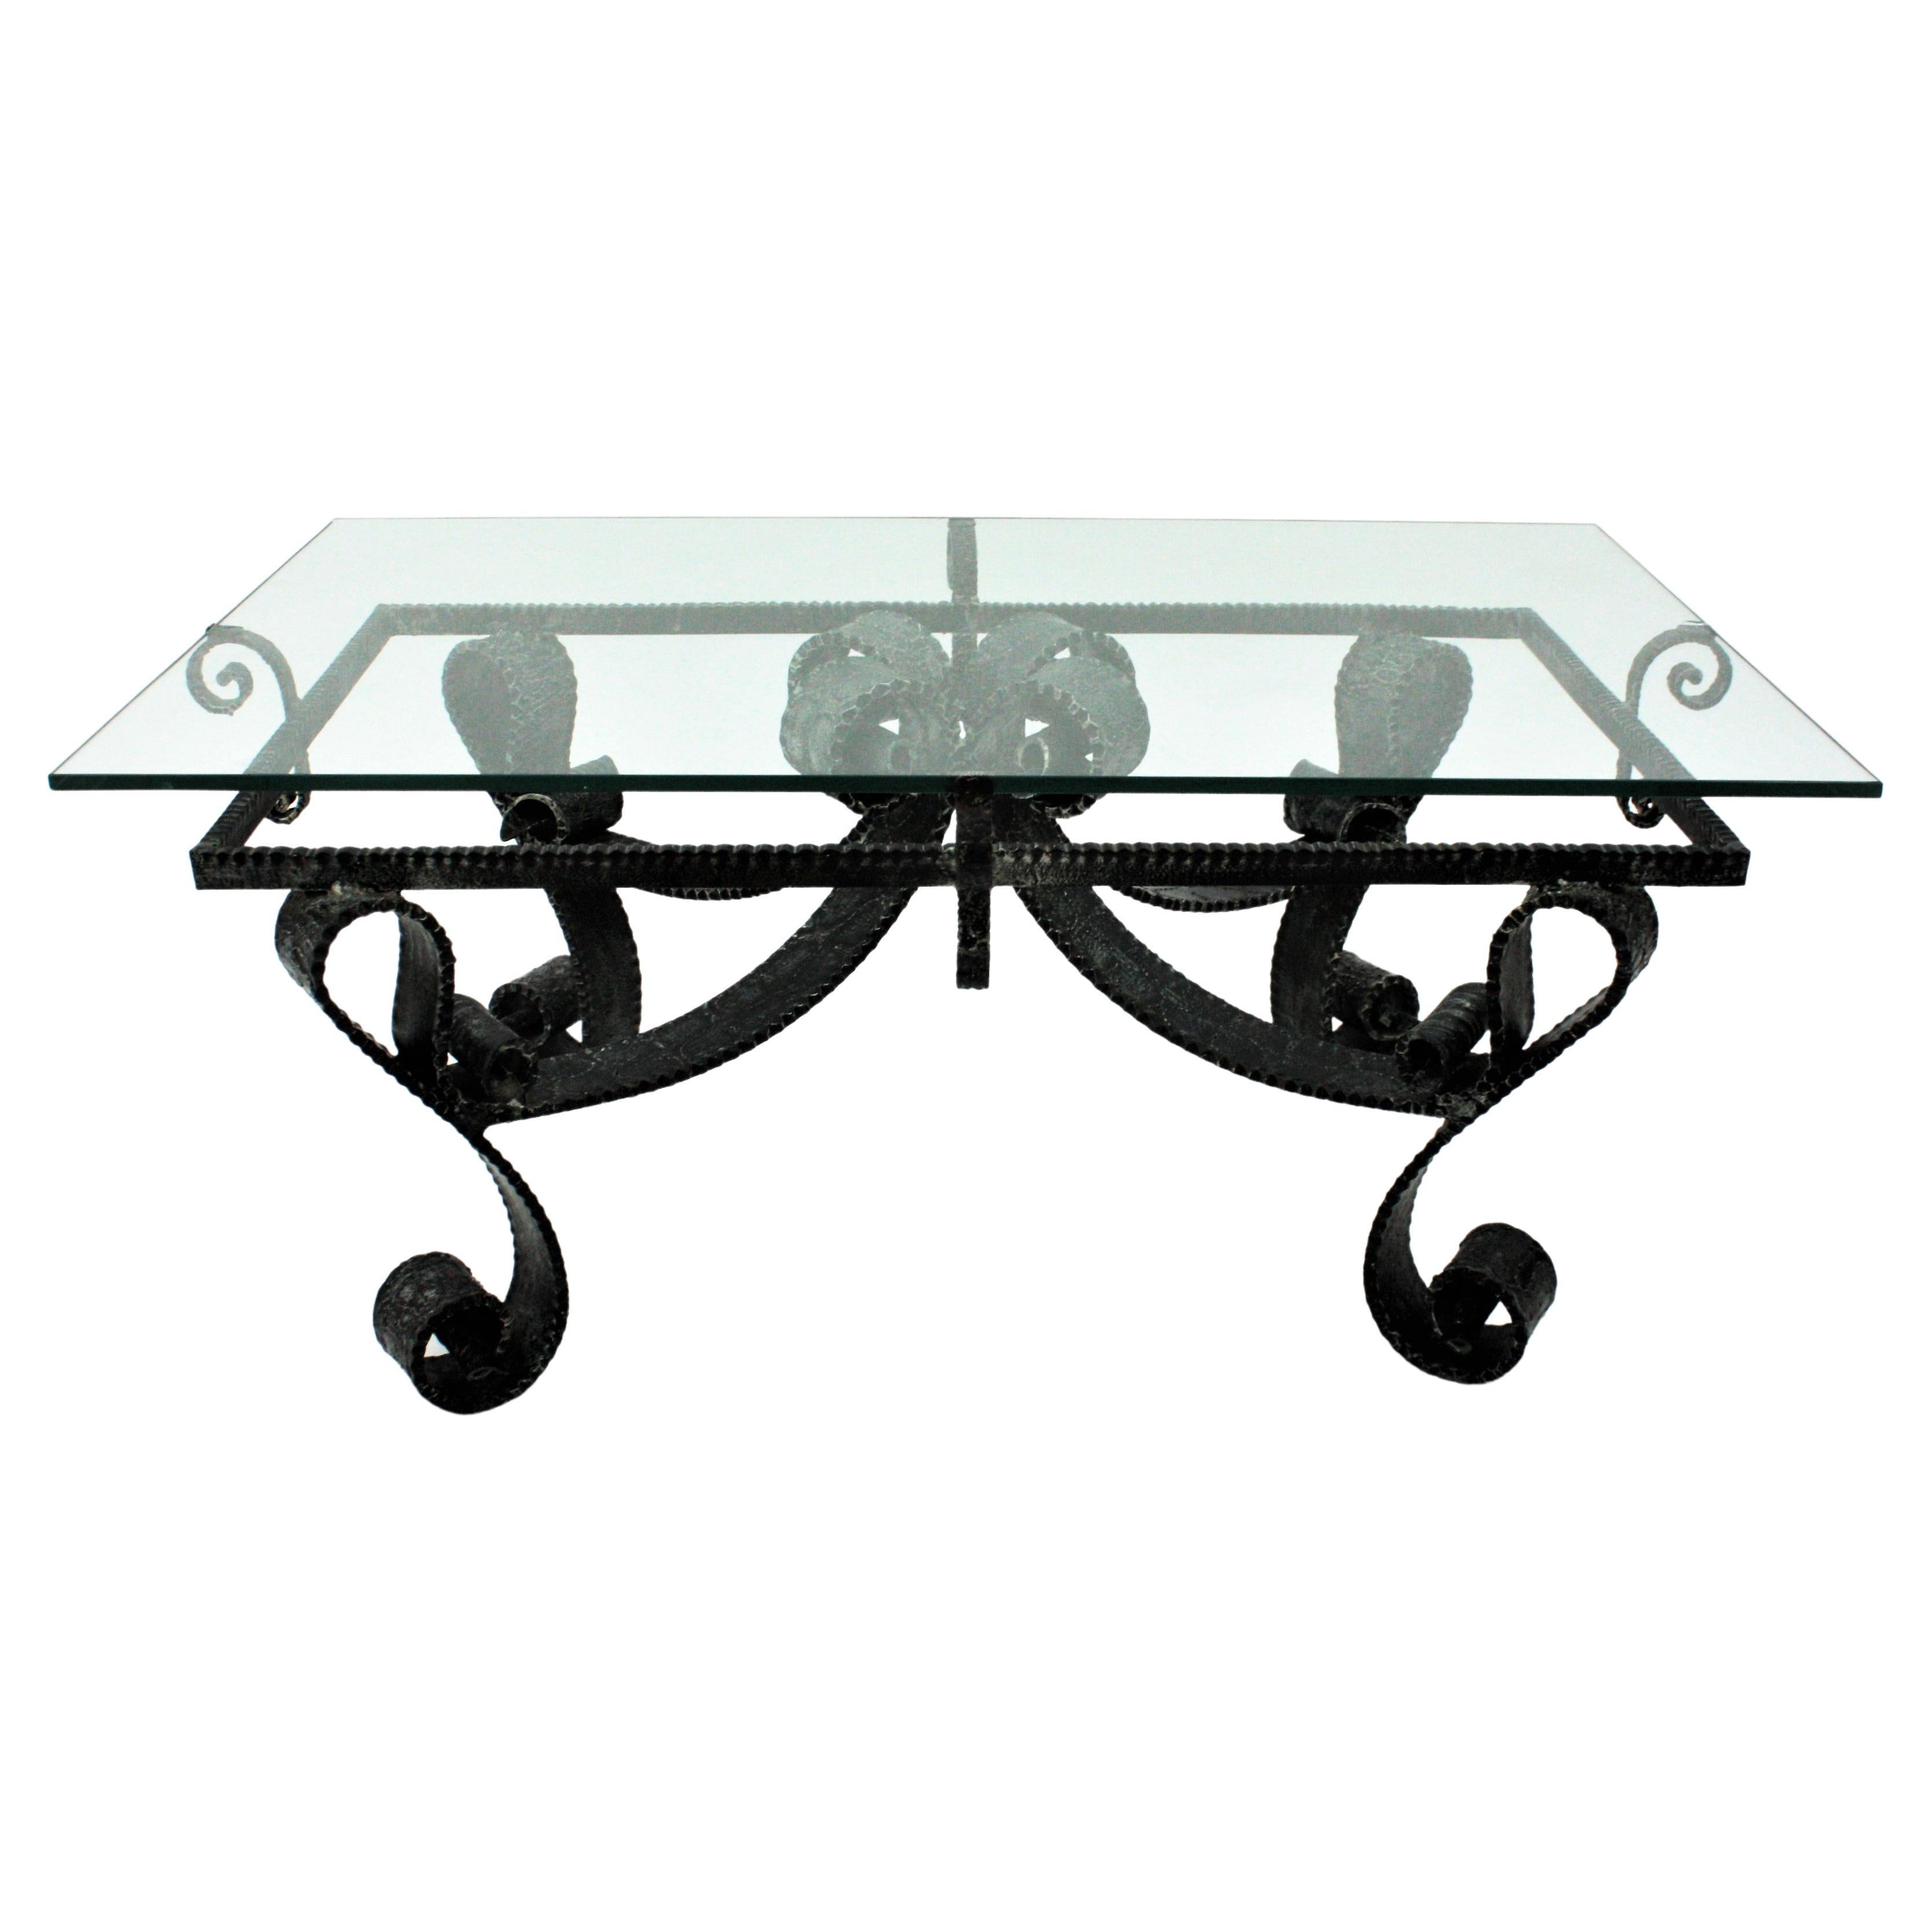 Hand wrought iron low table, France, 1960s
This french coffee table has a gorgeous constuction with scrolled legs and scroll detailings on the top and below the glass.
It has a beautiful stretcher joining the four legs.
Very heavyweight